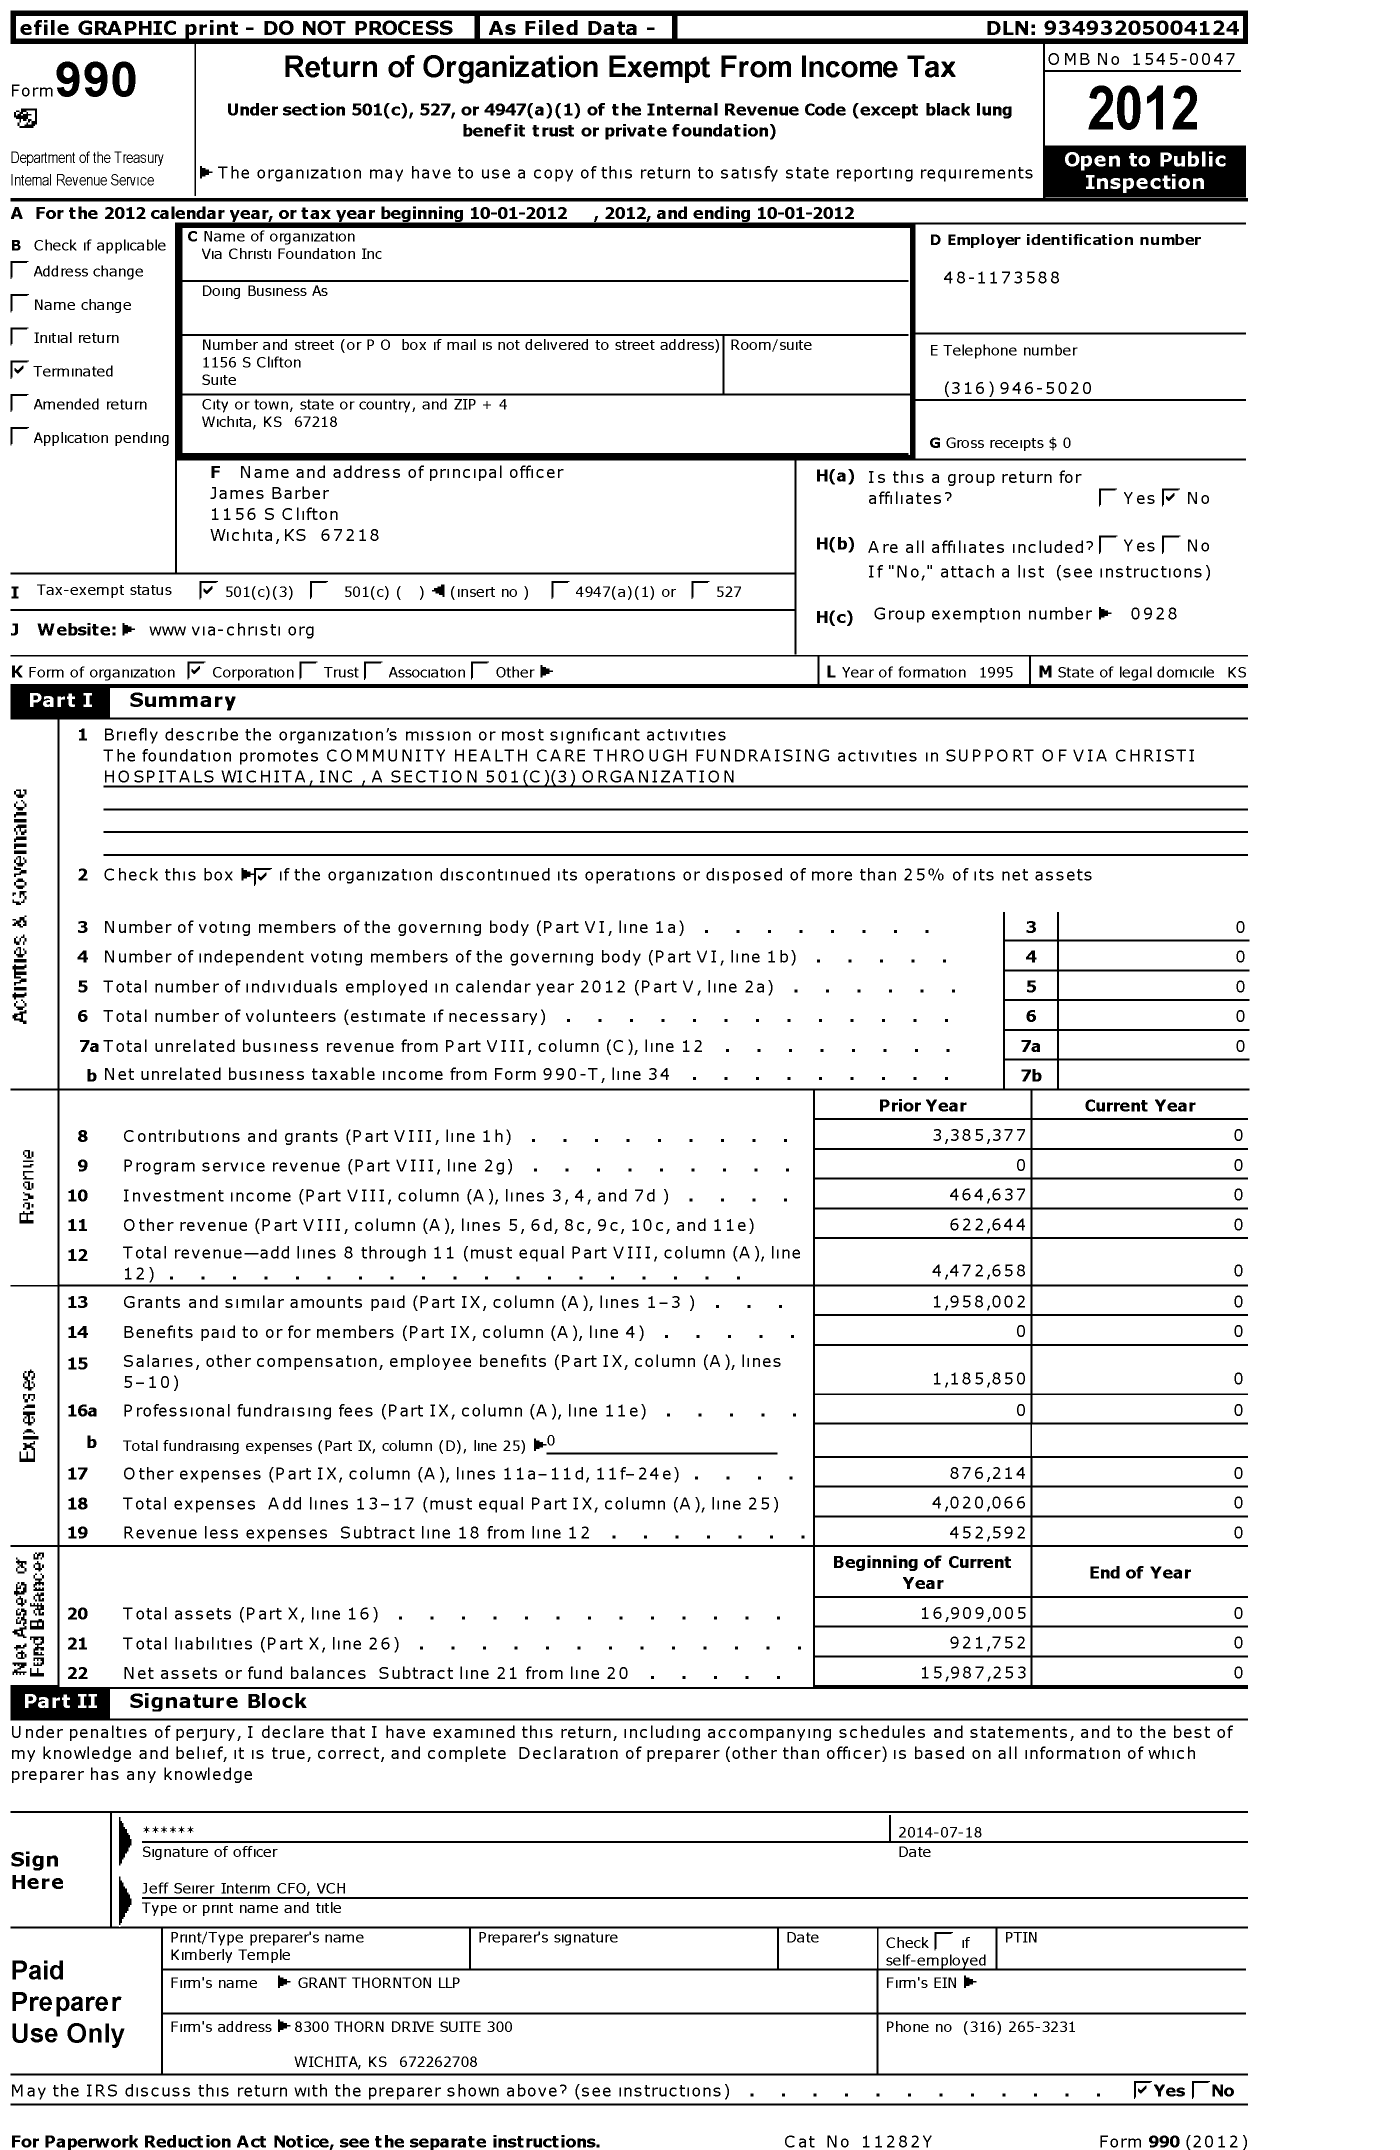 Image of first page of 2011 Form 990 for Via Christi Foundation